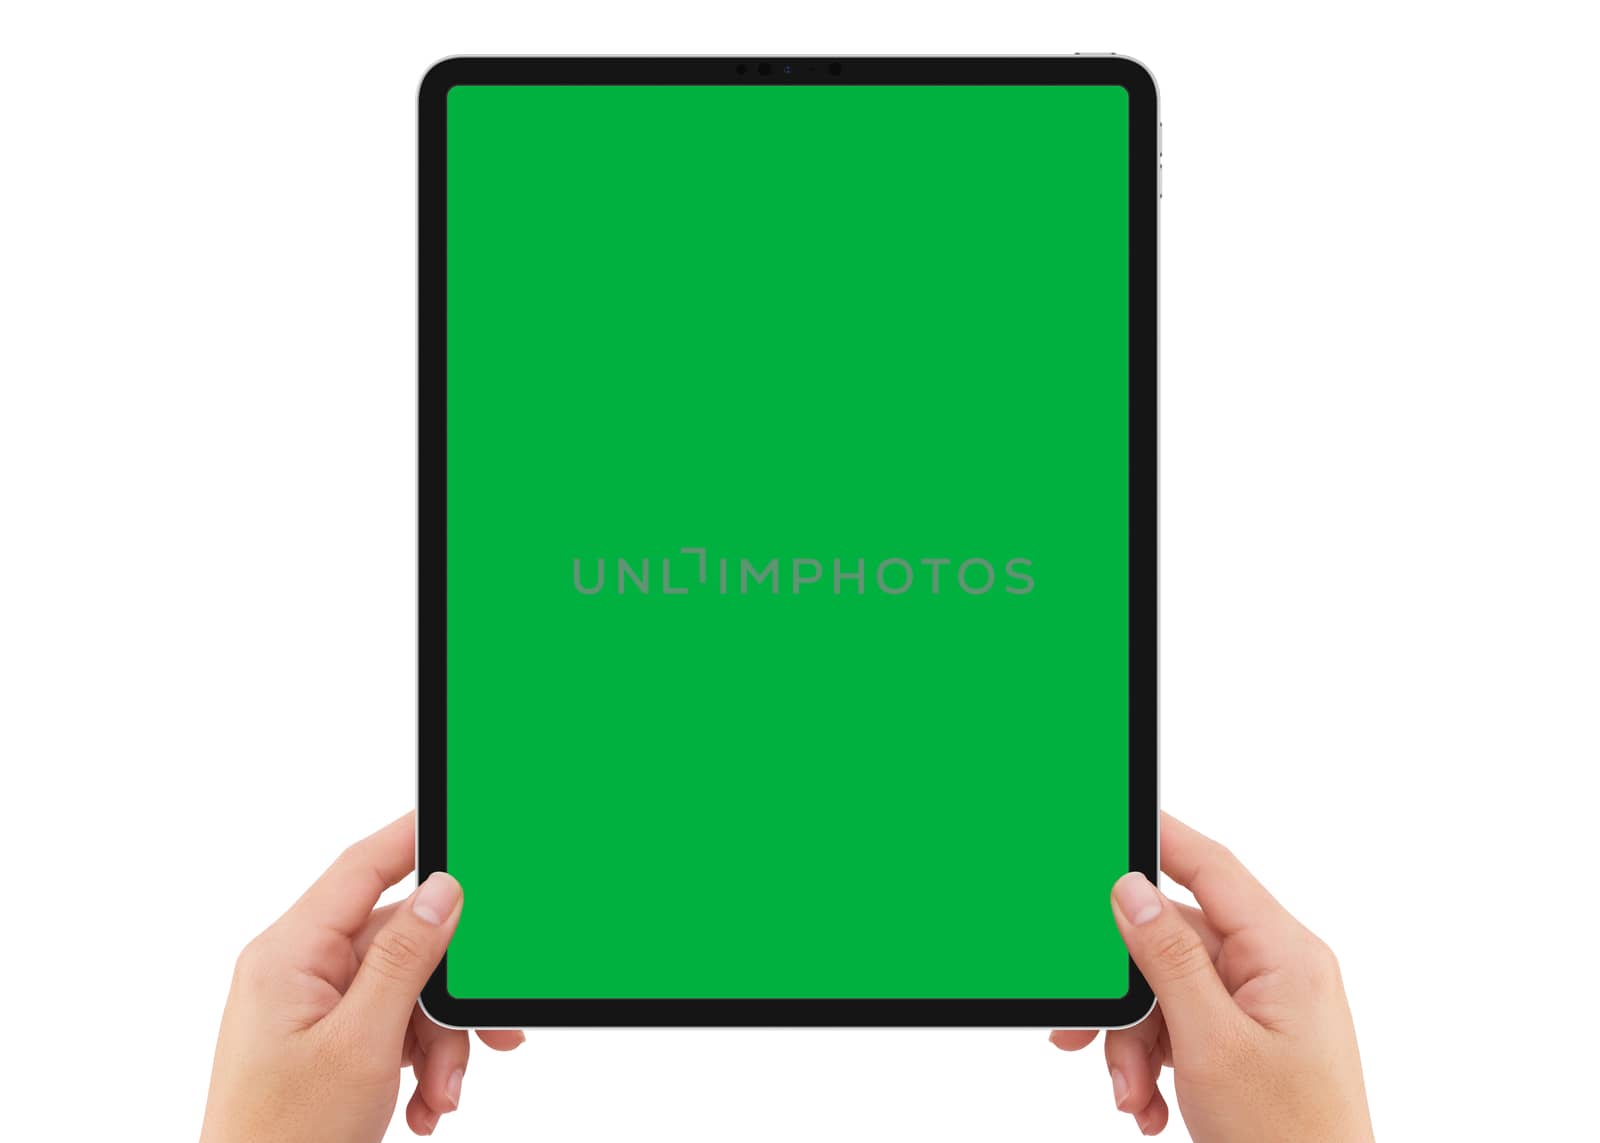 Isolated human left hand holding vertical black tablet media device with green screen for video production